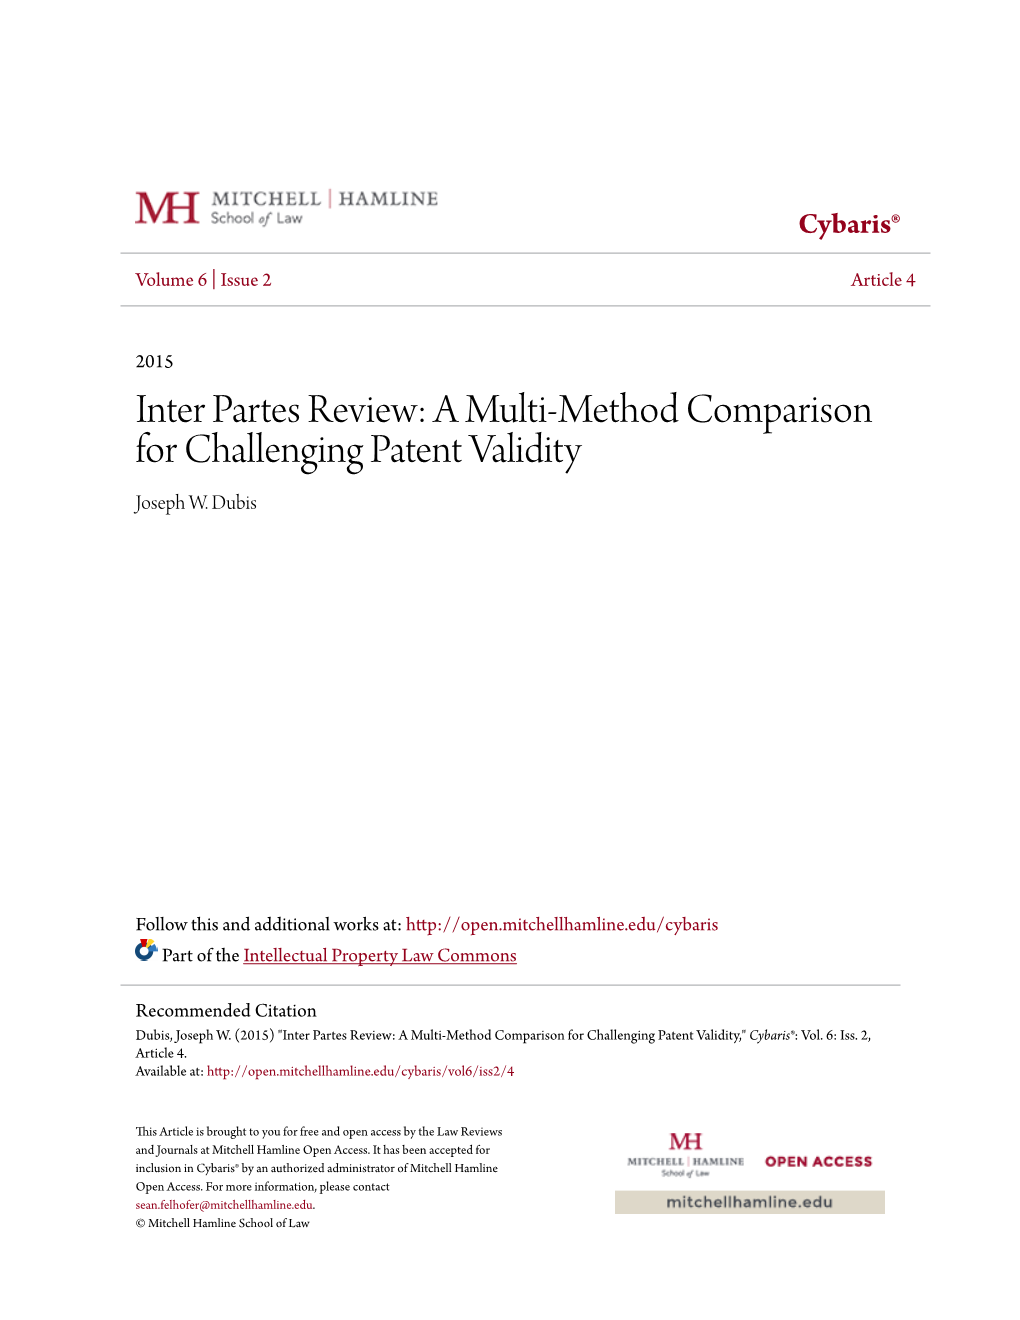 Inter Partes Review: a Multi-Method Comparison for Challenging Patent Validity Joseph W